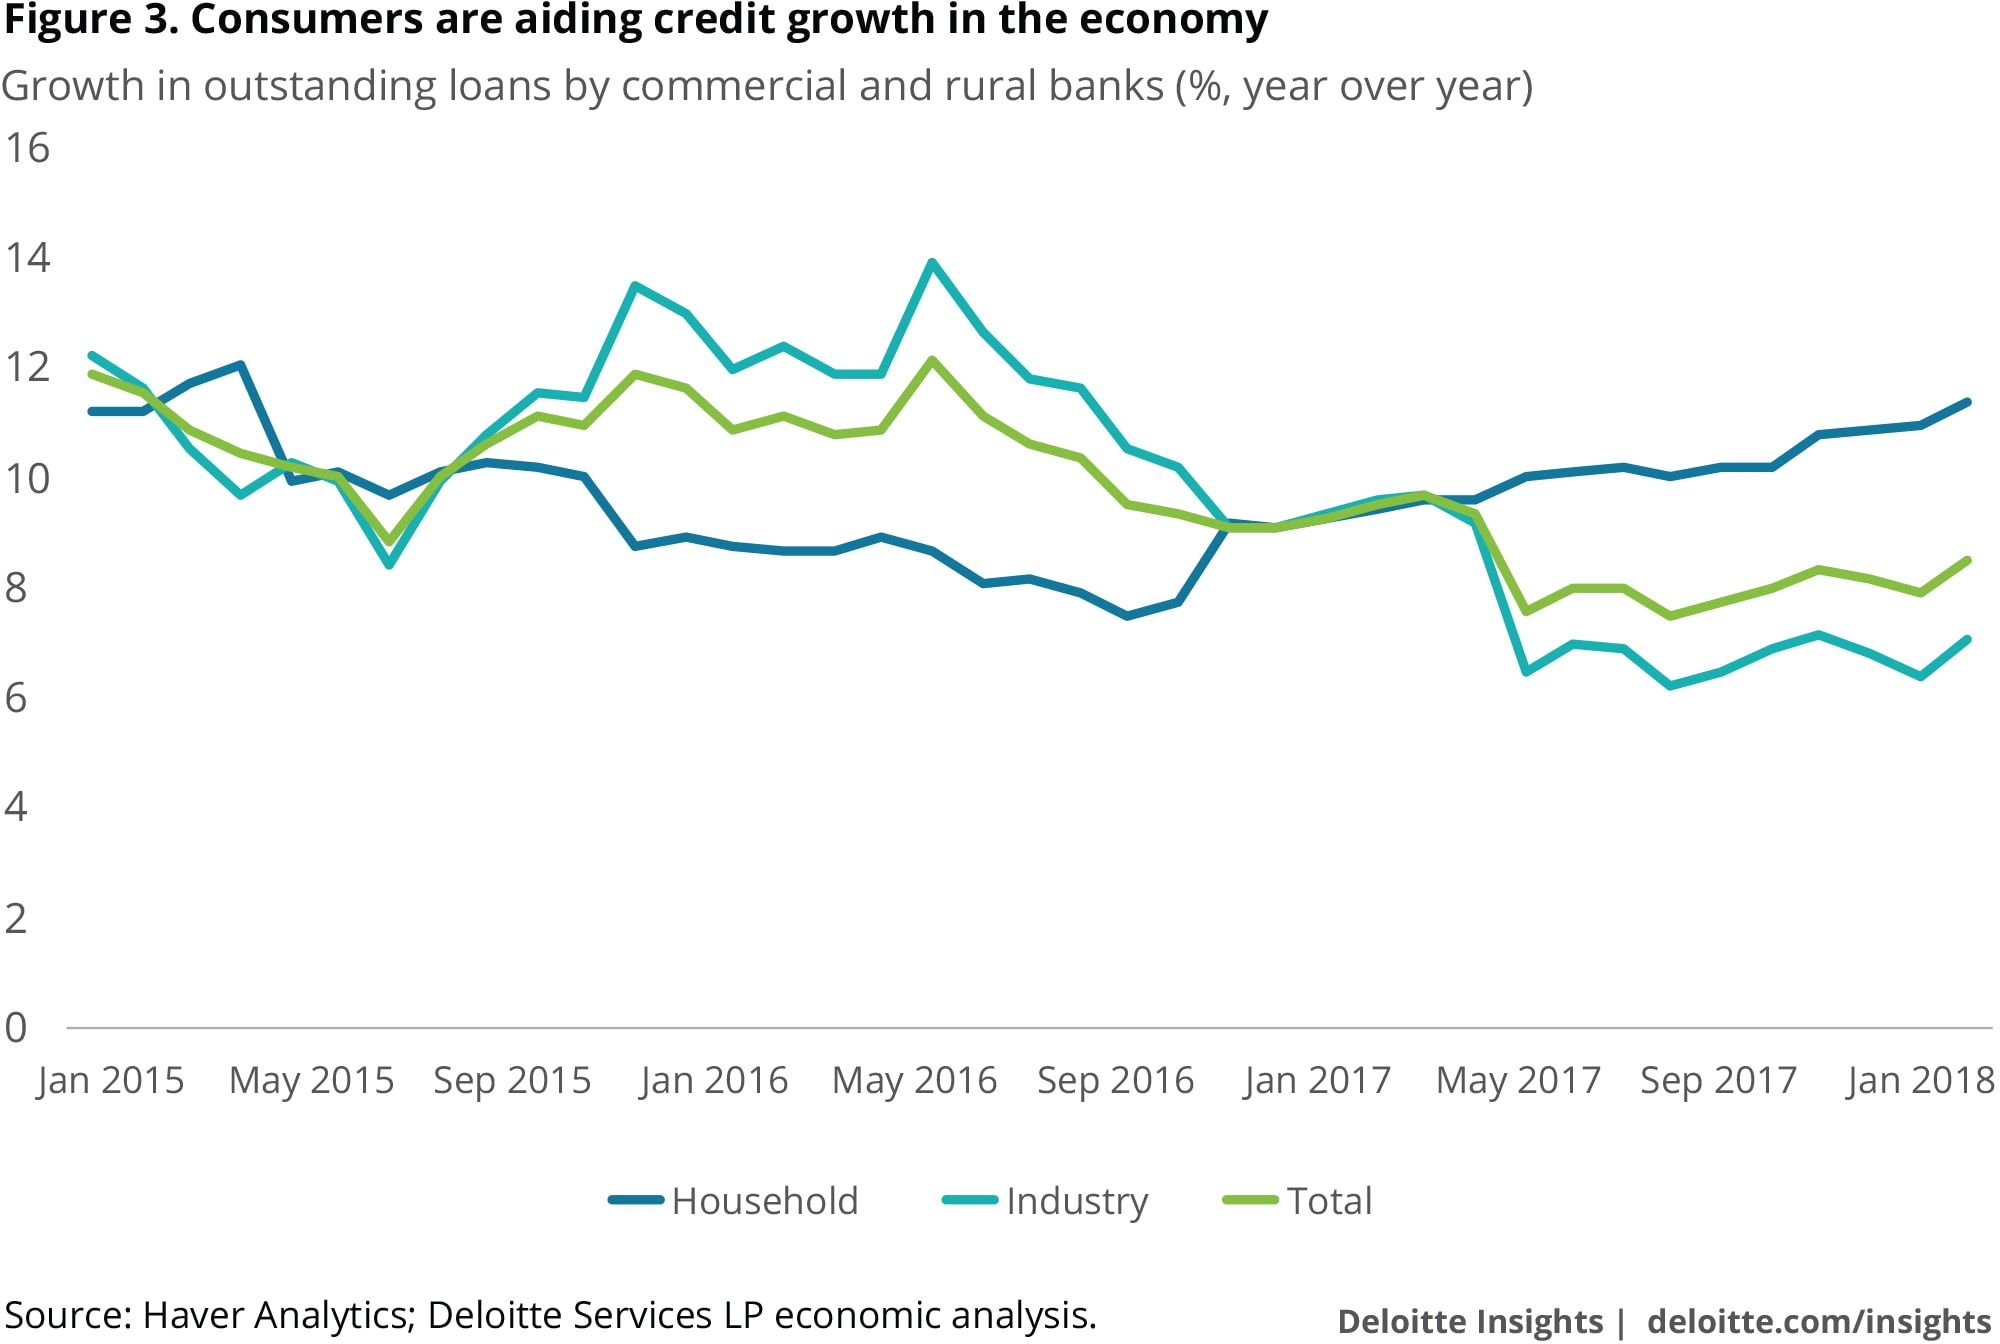 Consumers are aiding credit growth in the economy